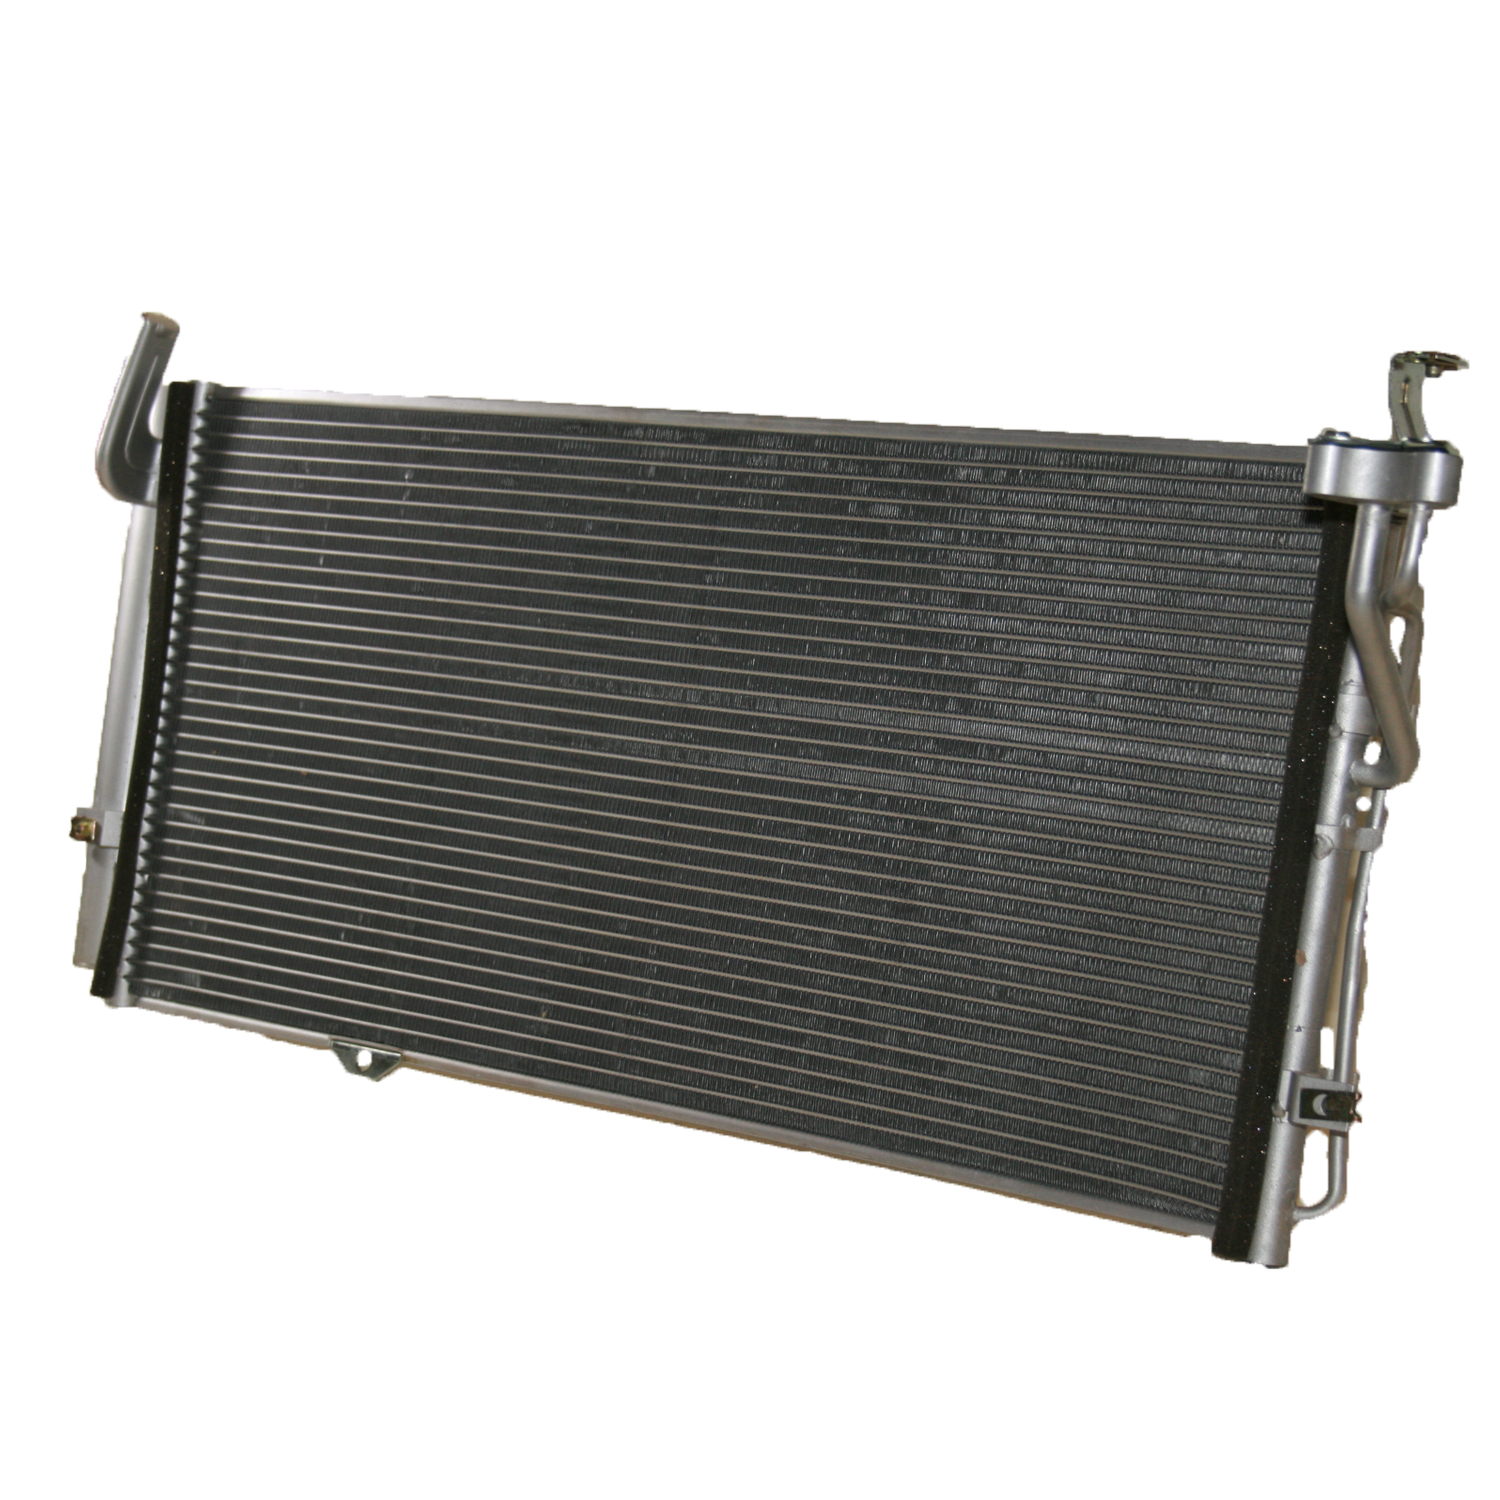 TCW Condenser 44-3345 New Product Image field_60b6a13a6e67c